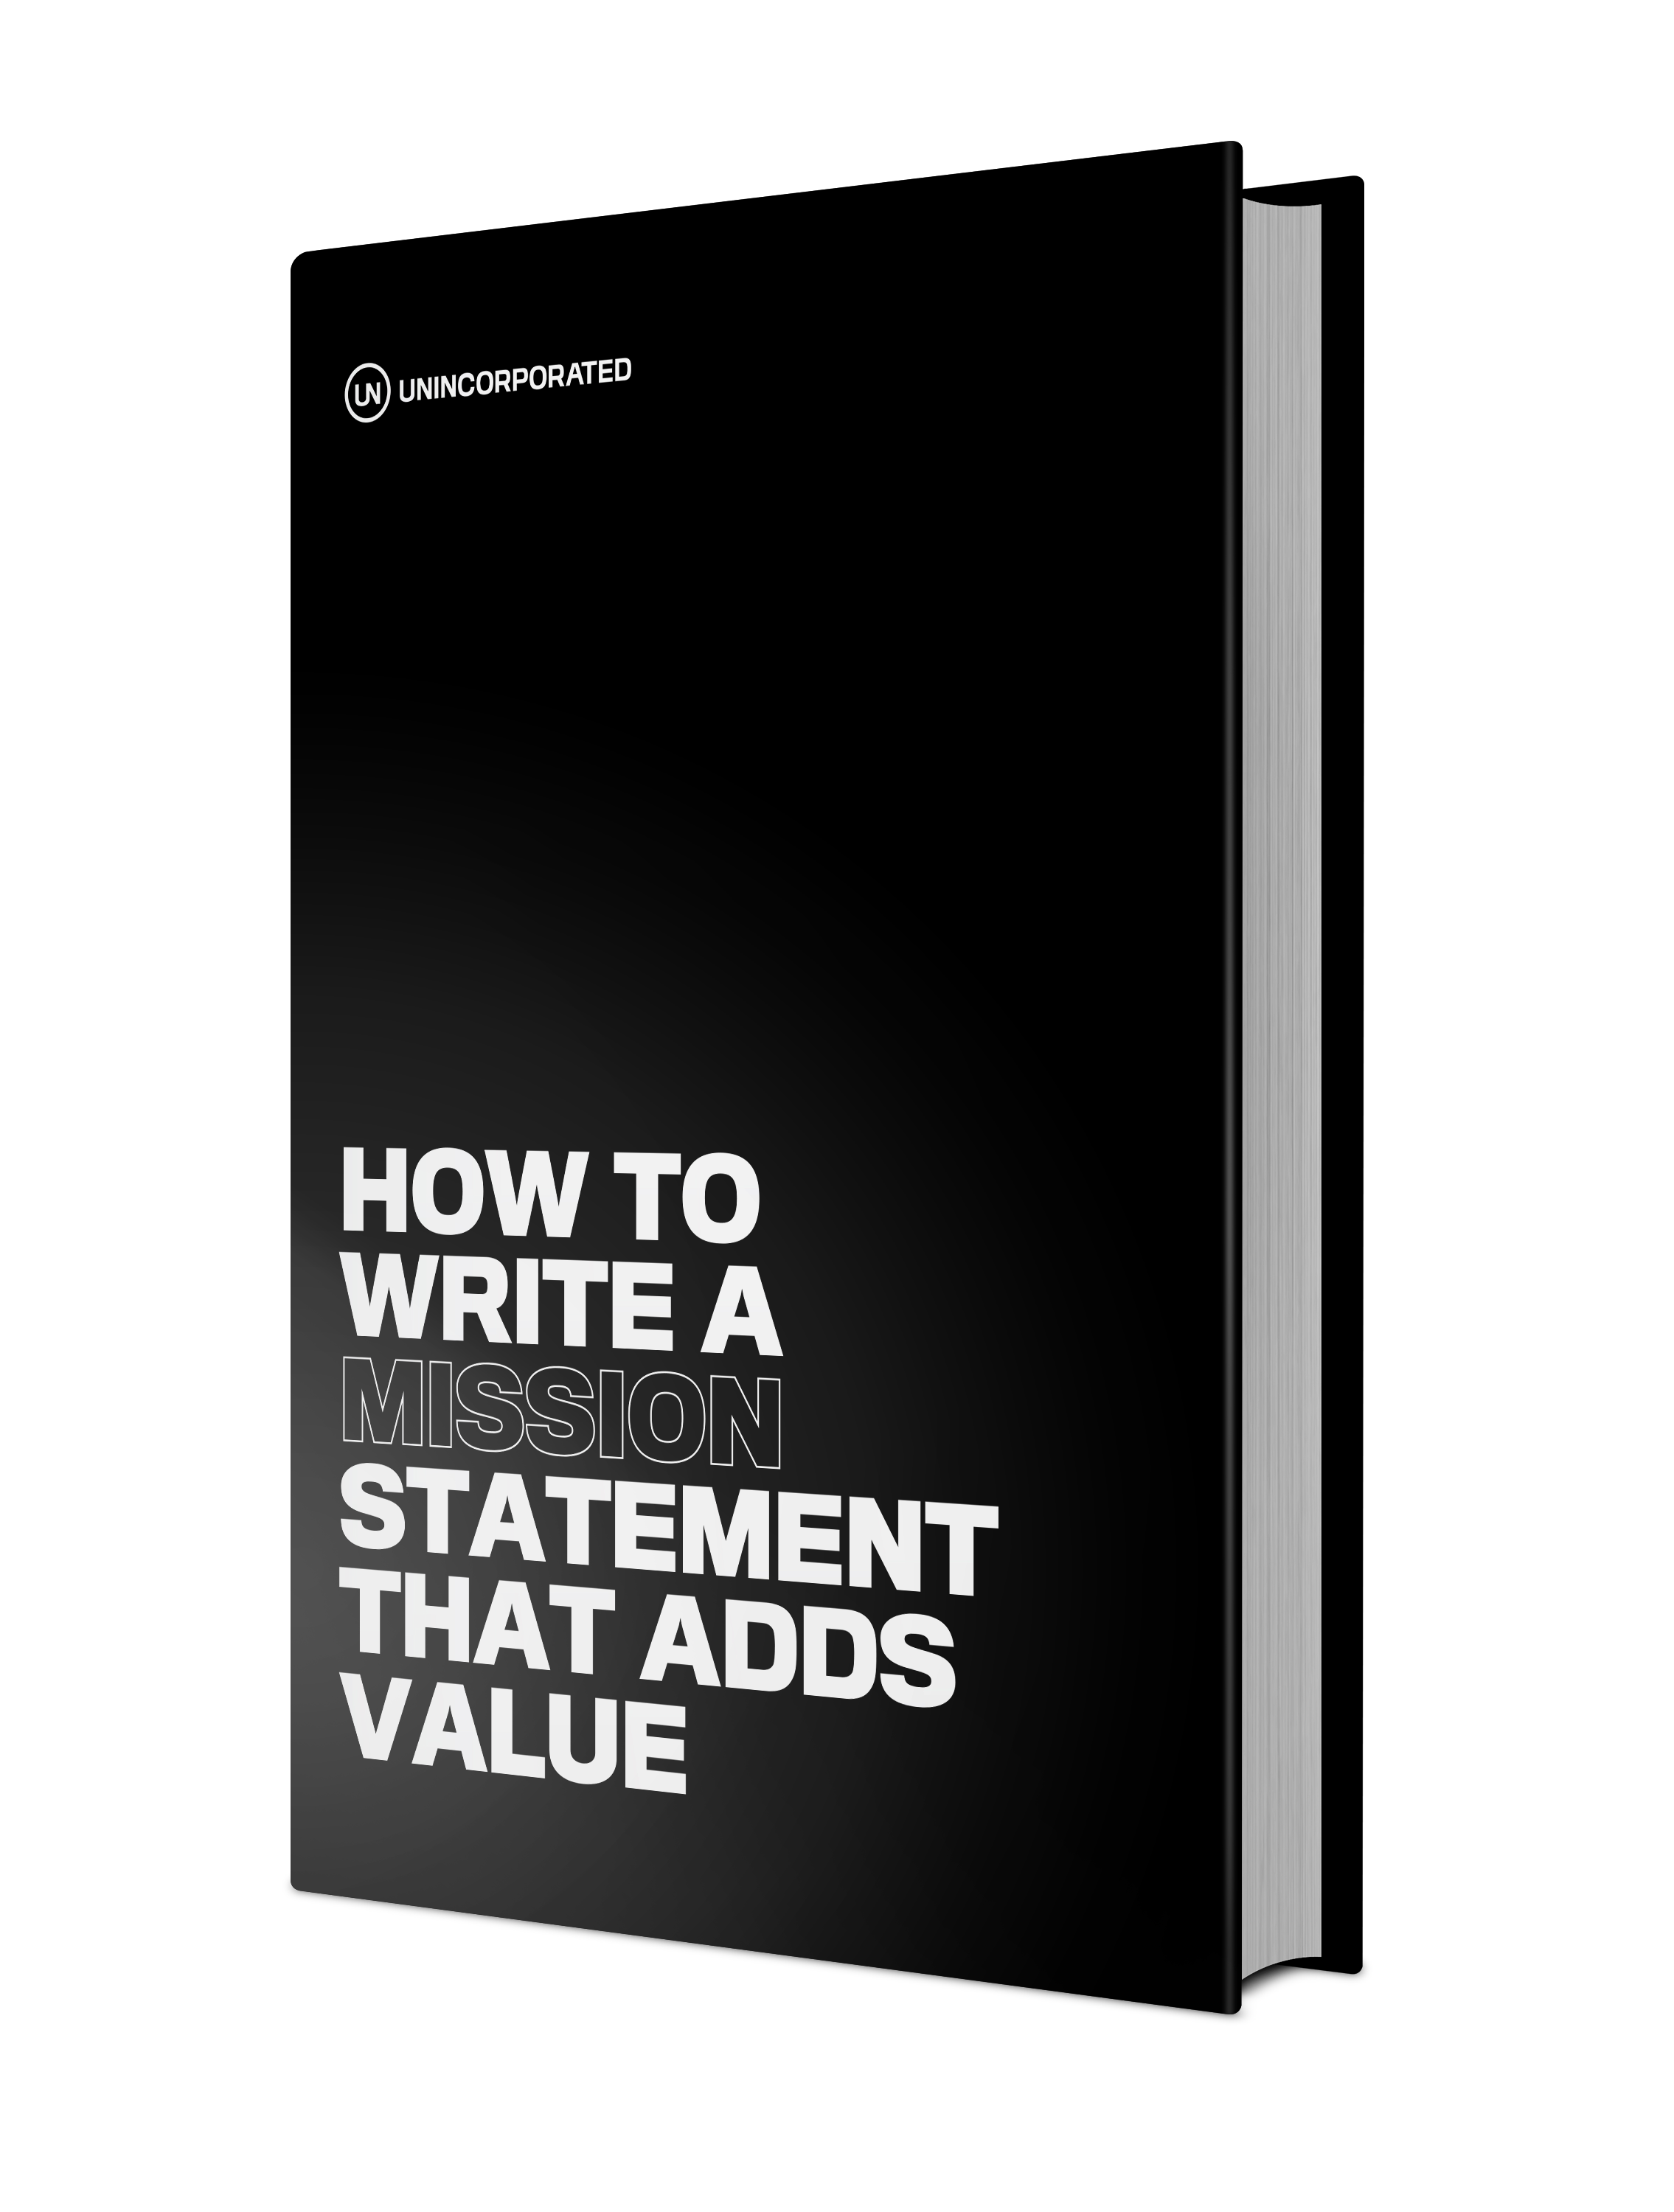 How to Write a Mission Statement that ADDS Value